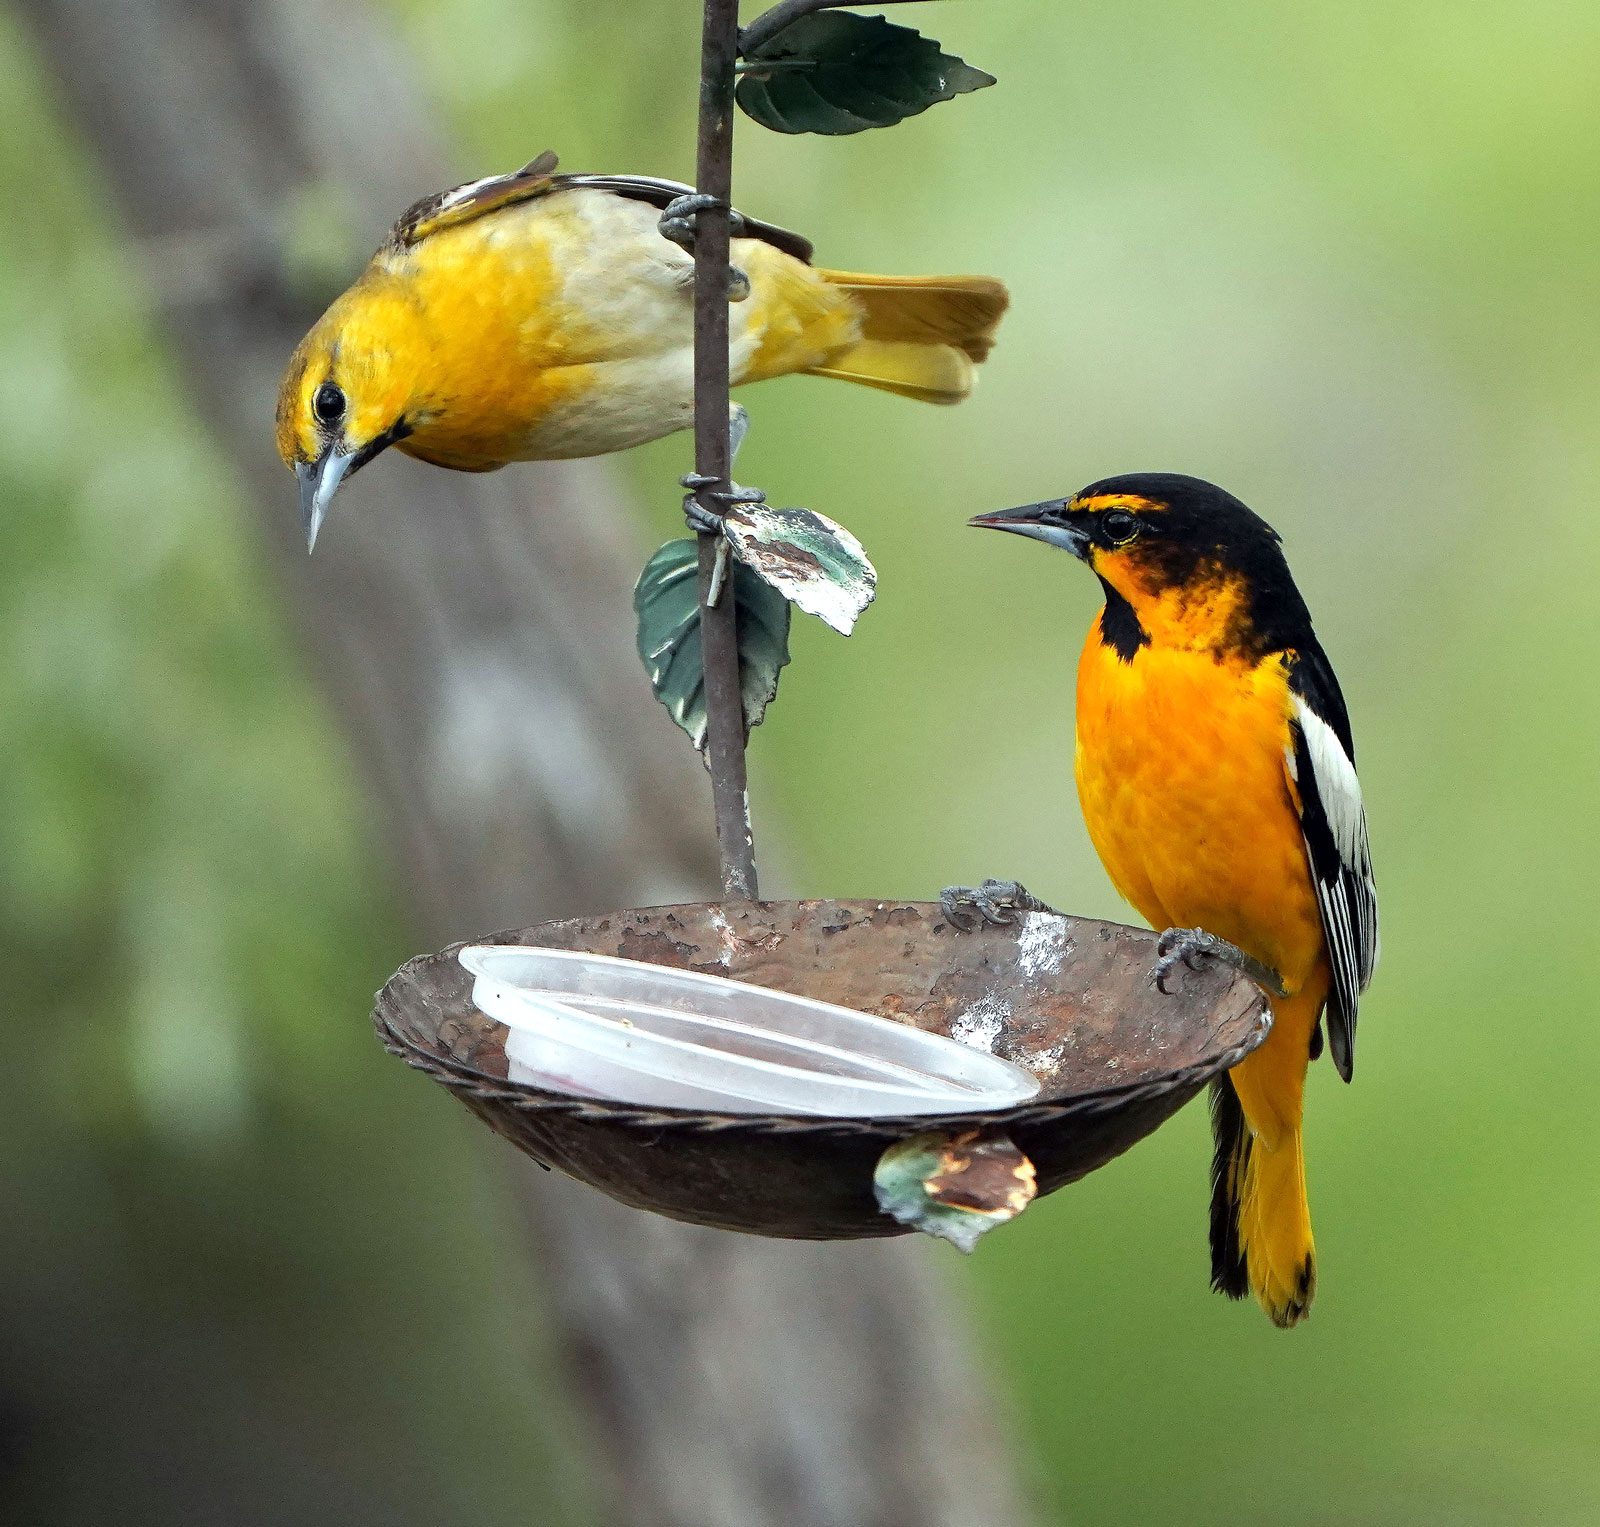 Bullock's/Baltimore Oriole hybrids at a feeder in Colorado. Photo by Cathy Sheeter/Macaulay Library.